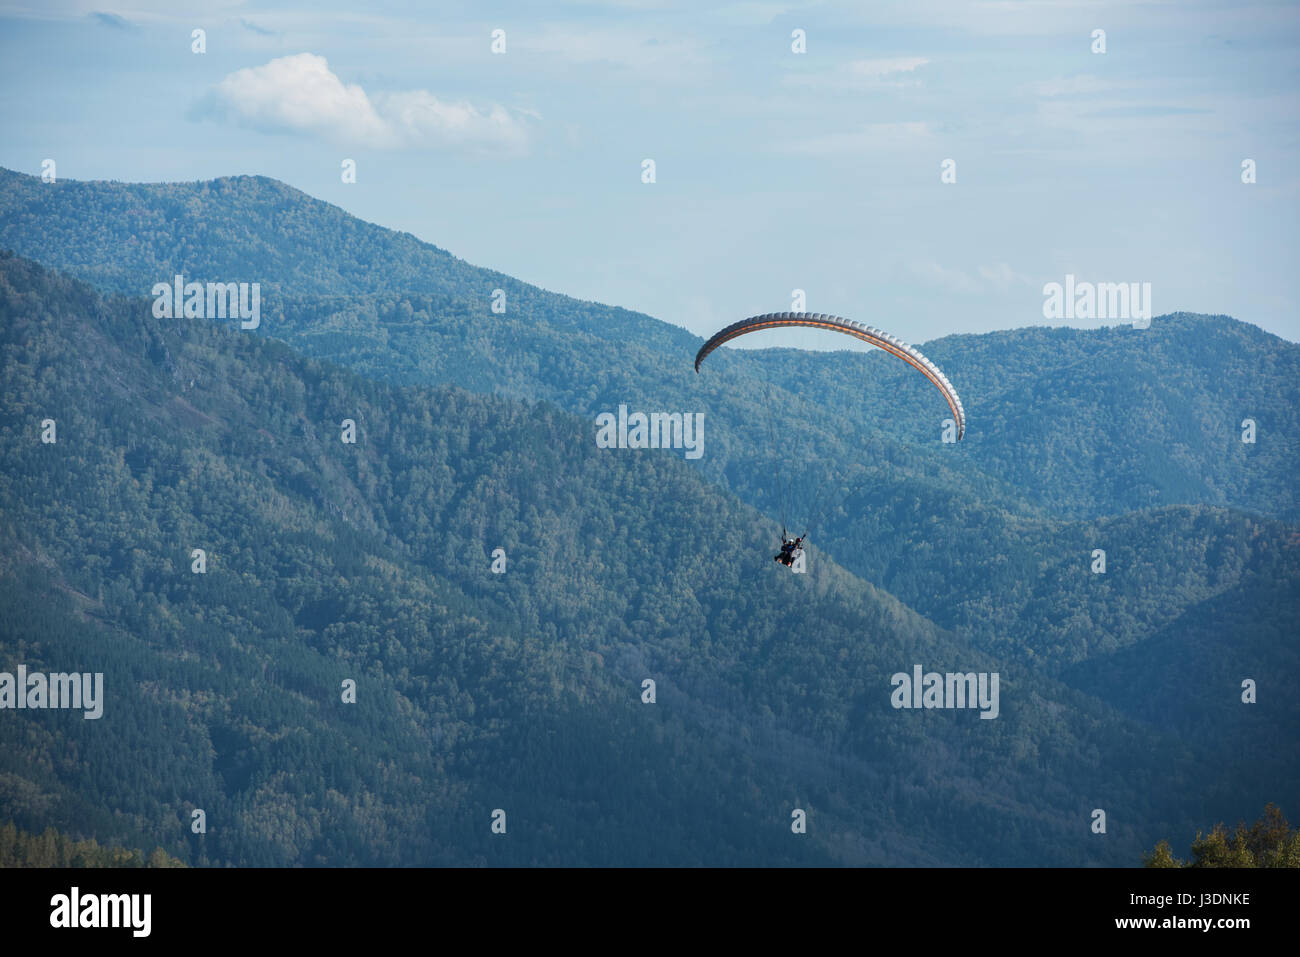 Paragliding in mountains. Para gliders in fight in the mountains, extreme sport activity. Stock Photo